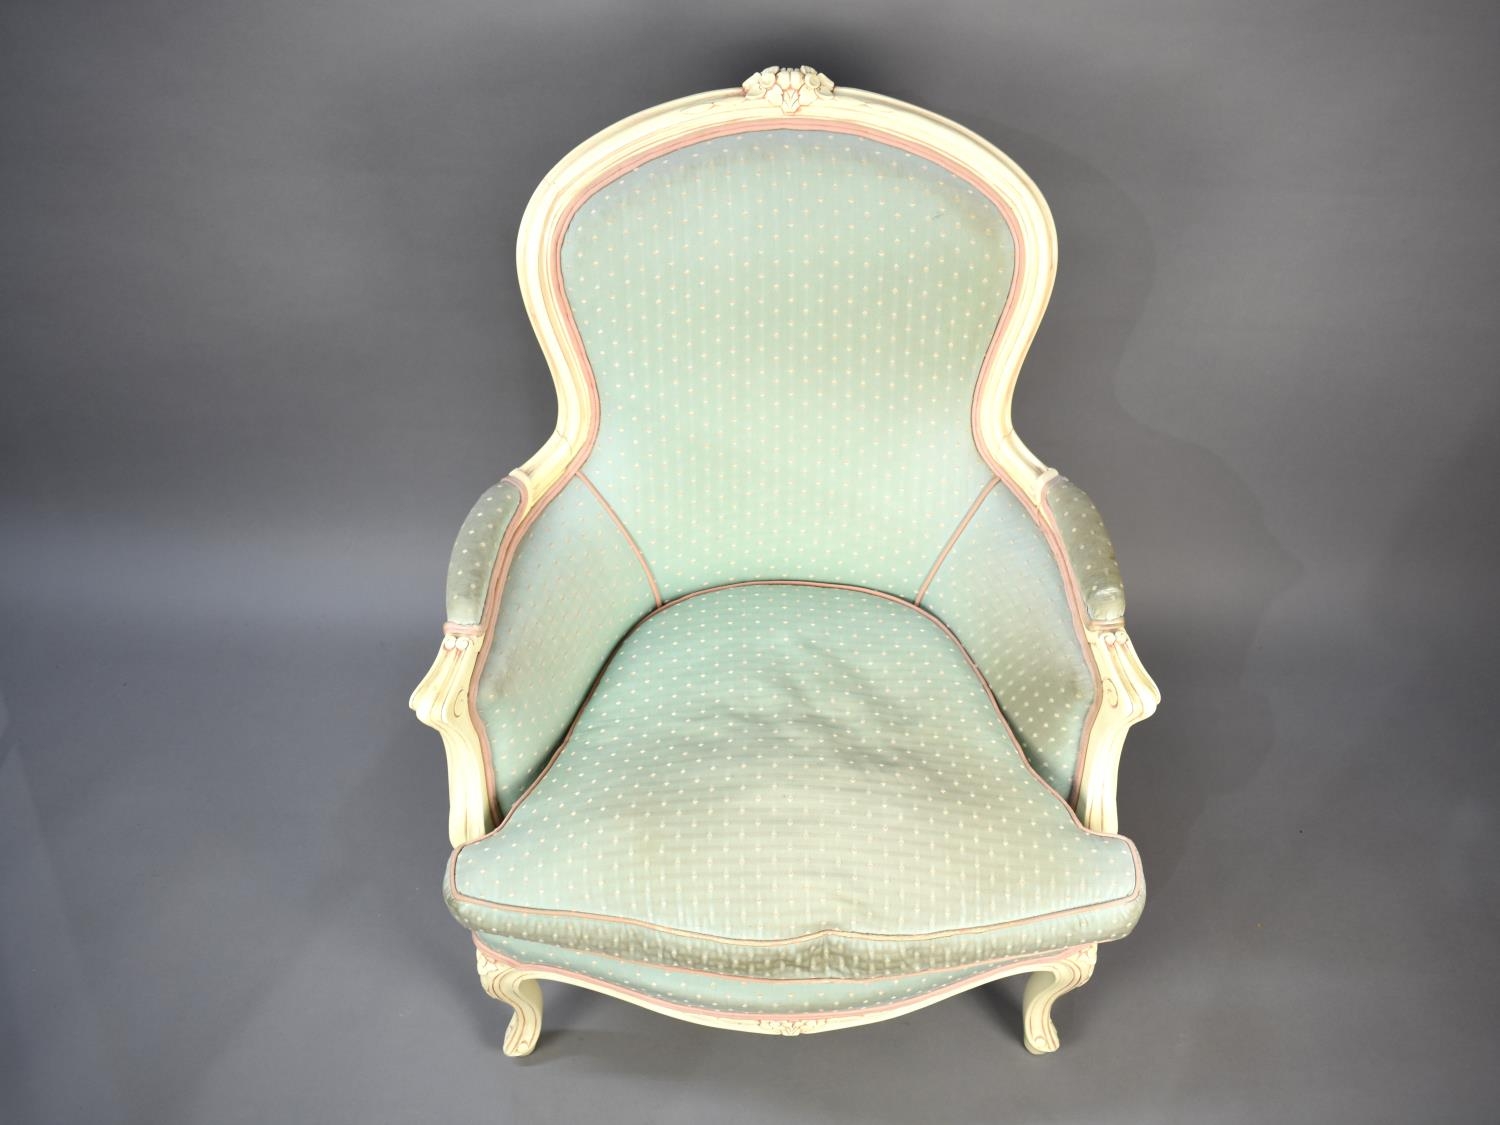 A Modern French Style Balloon Back Salon Armchair - Image 2 of 2